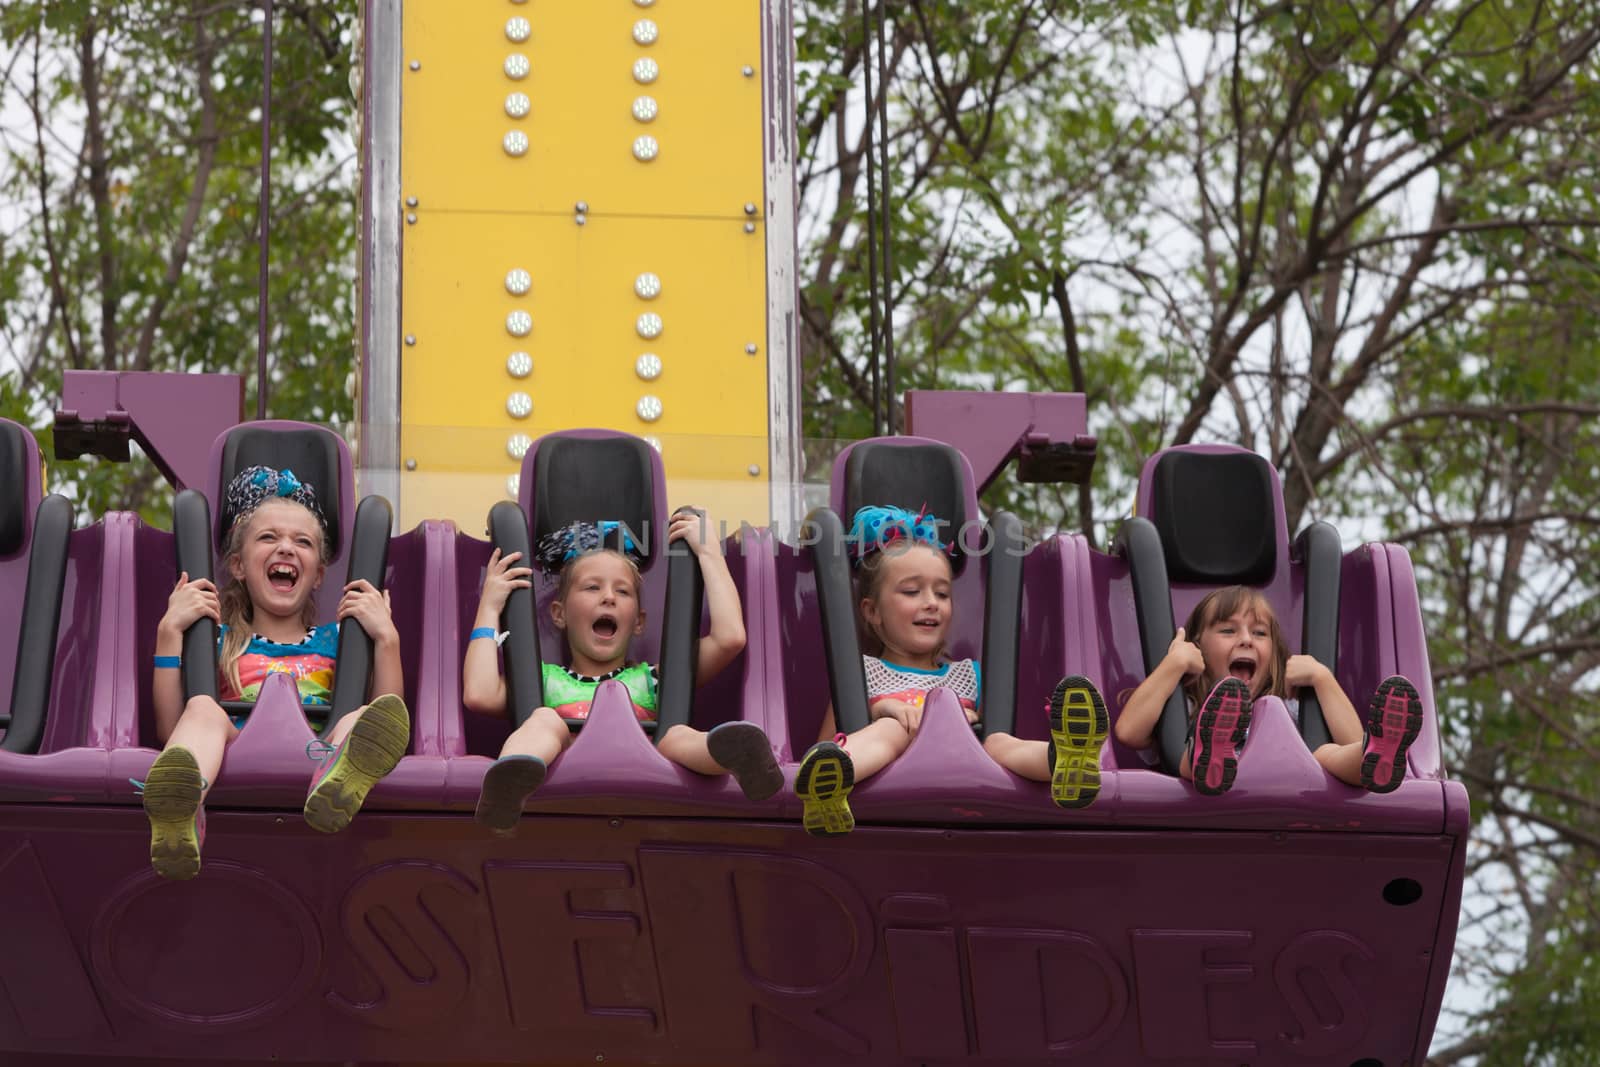 Girls on carnival ride at state fair by Creatista